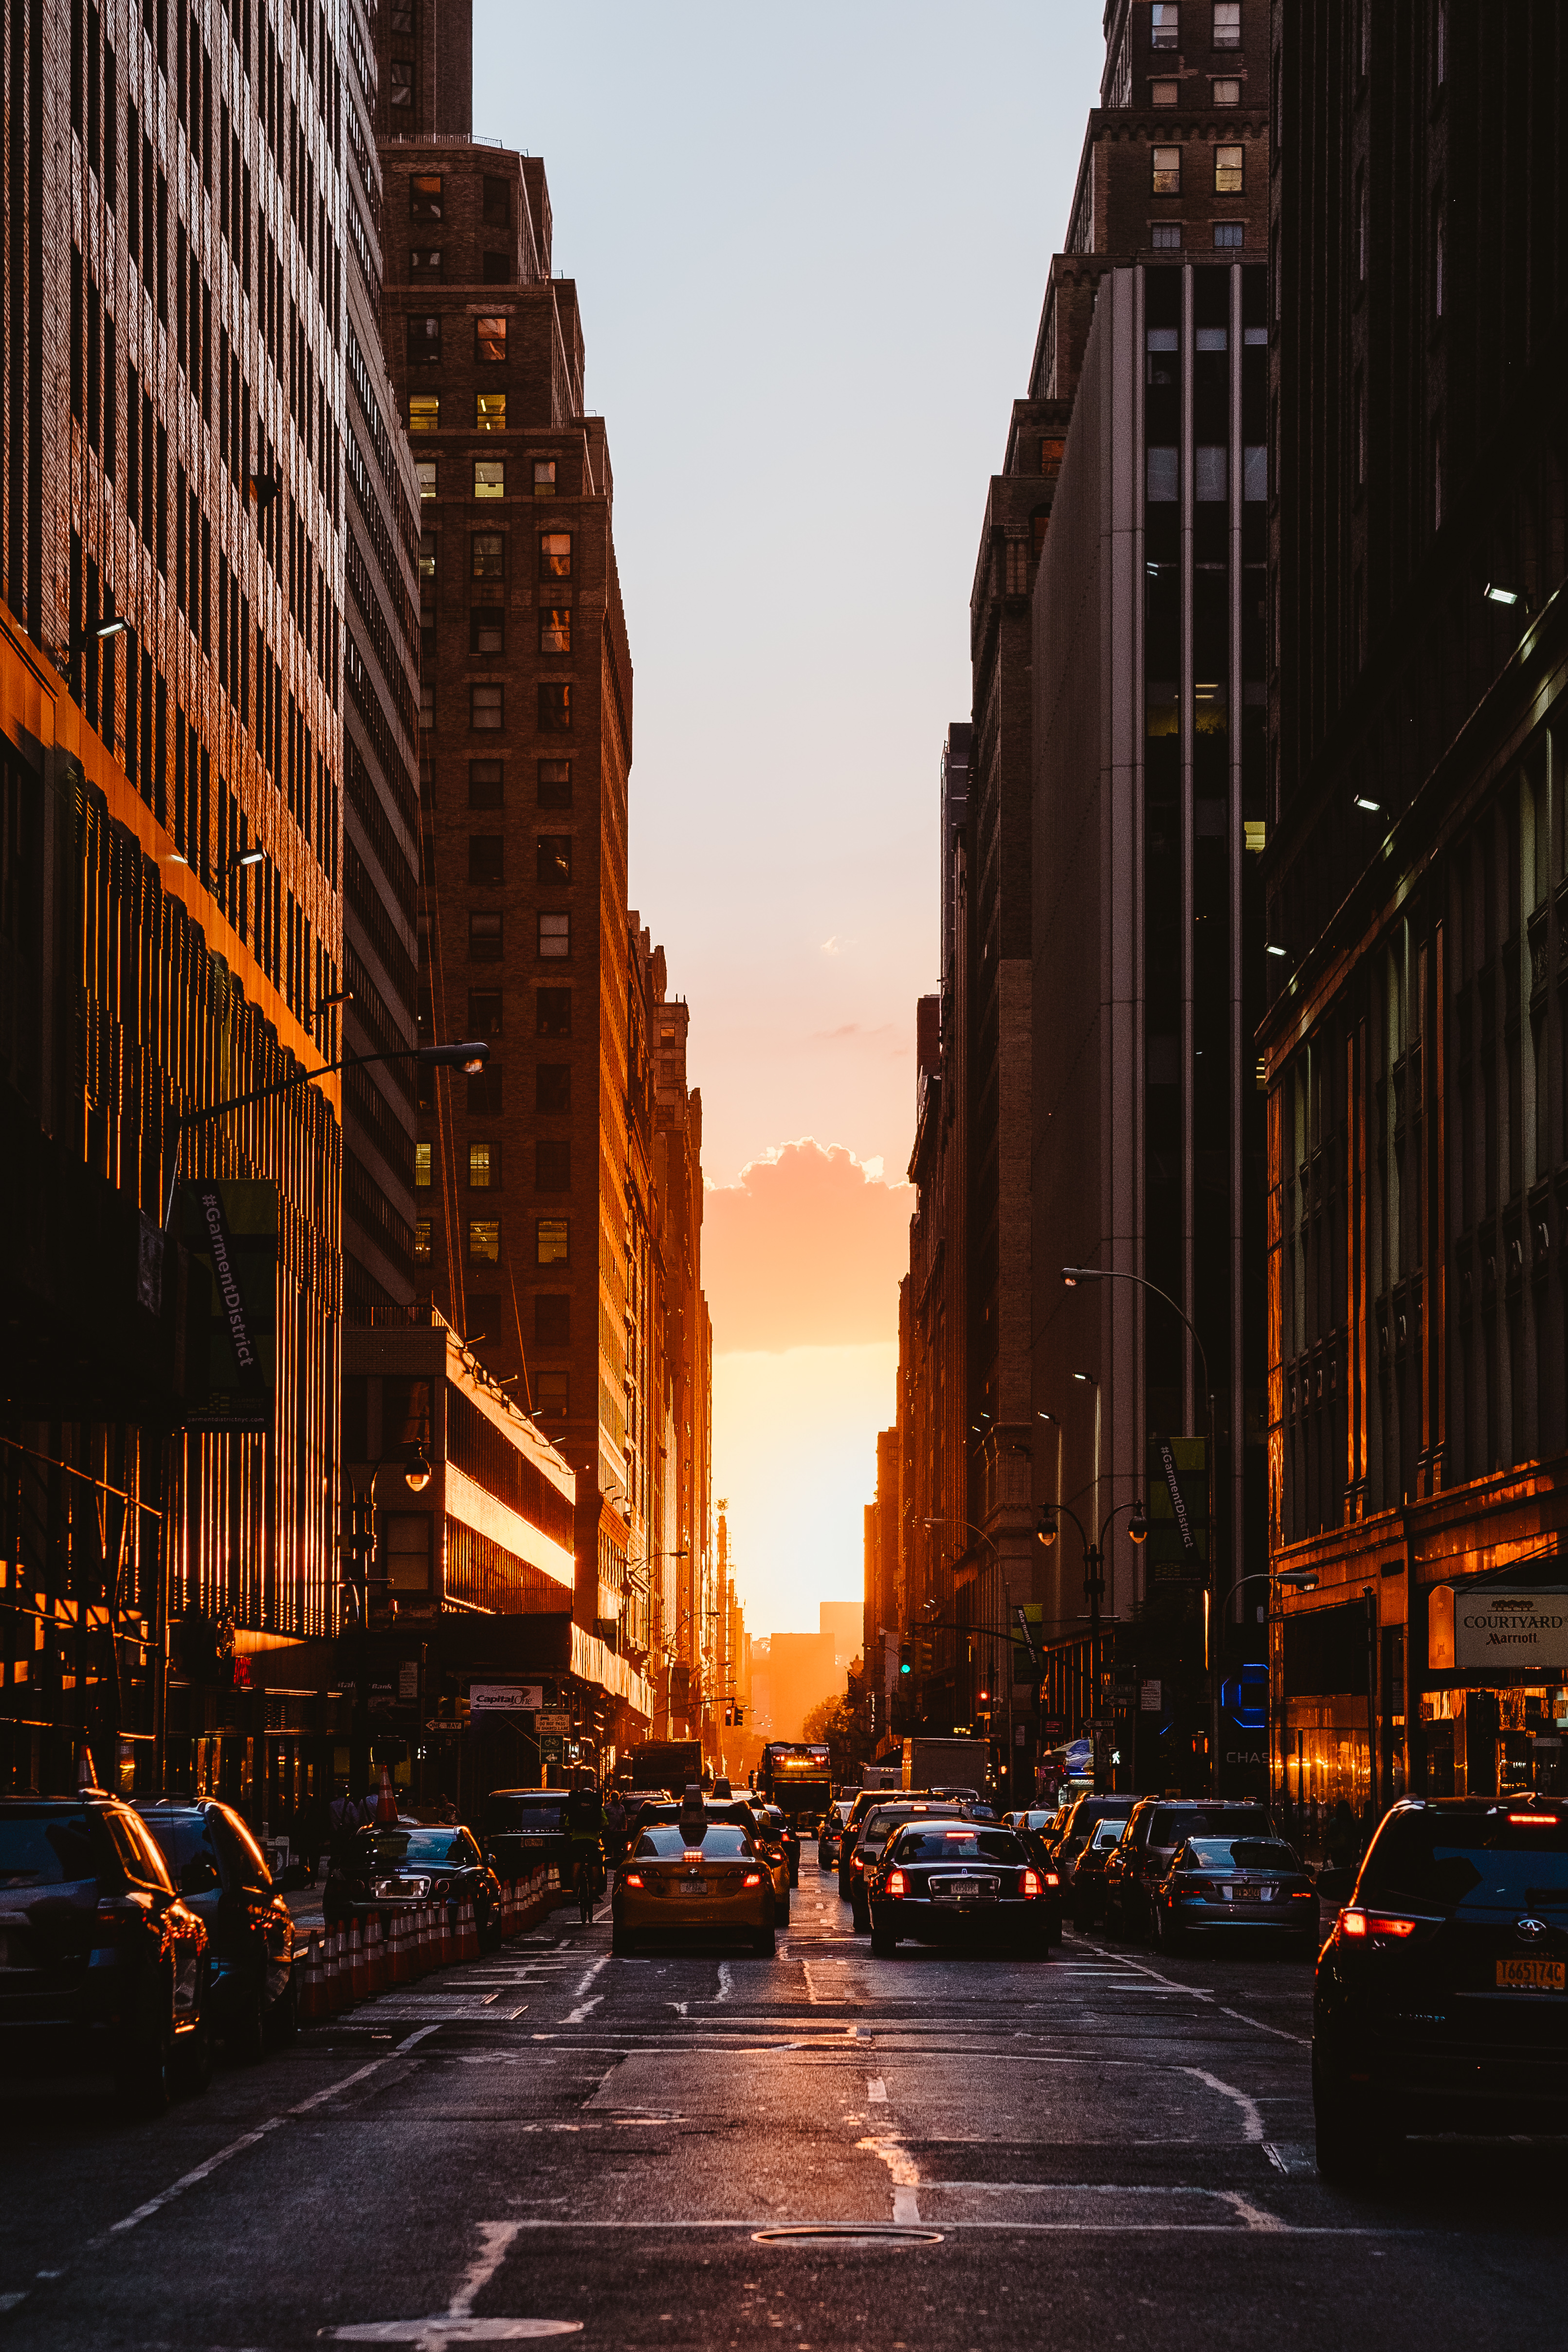 city, cars, cities, sunset, building, new york iphone wallpaper